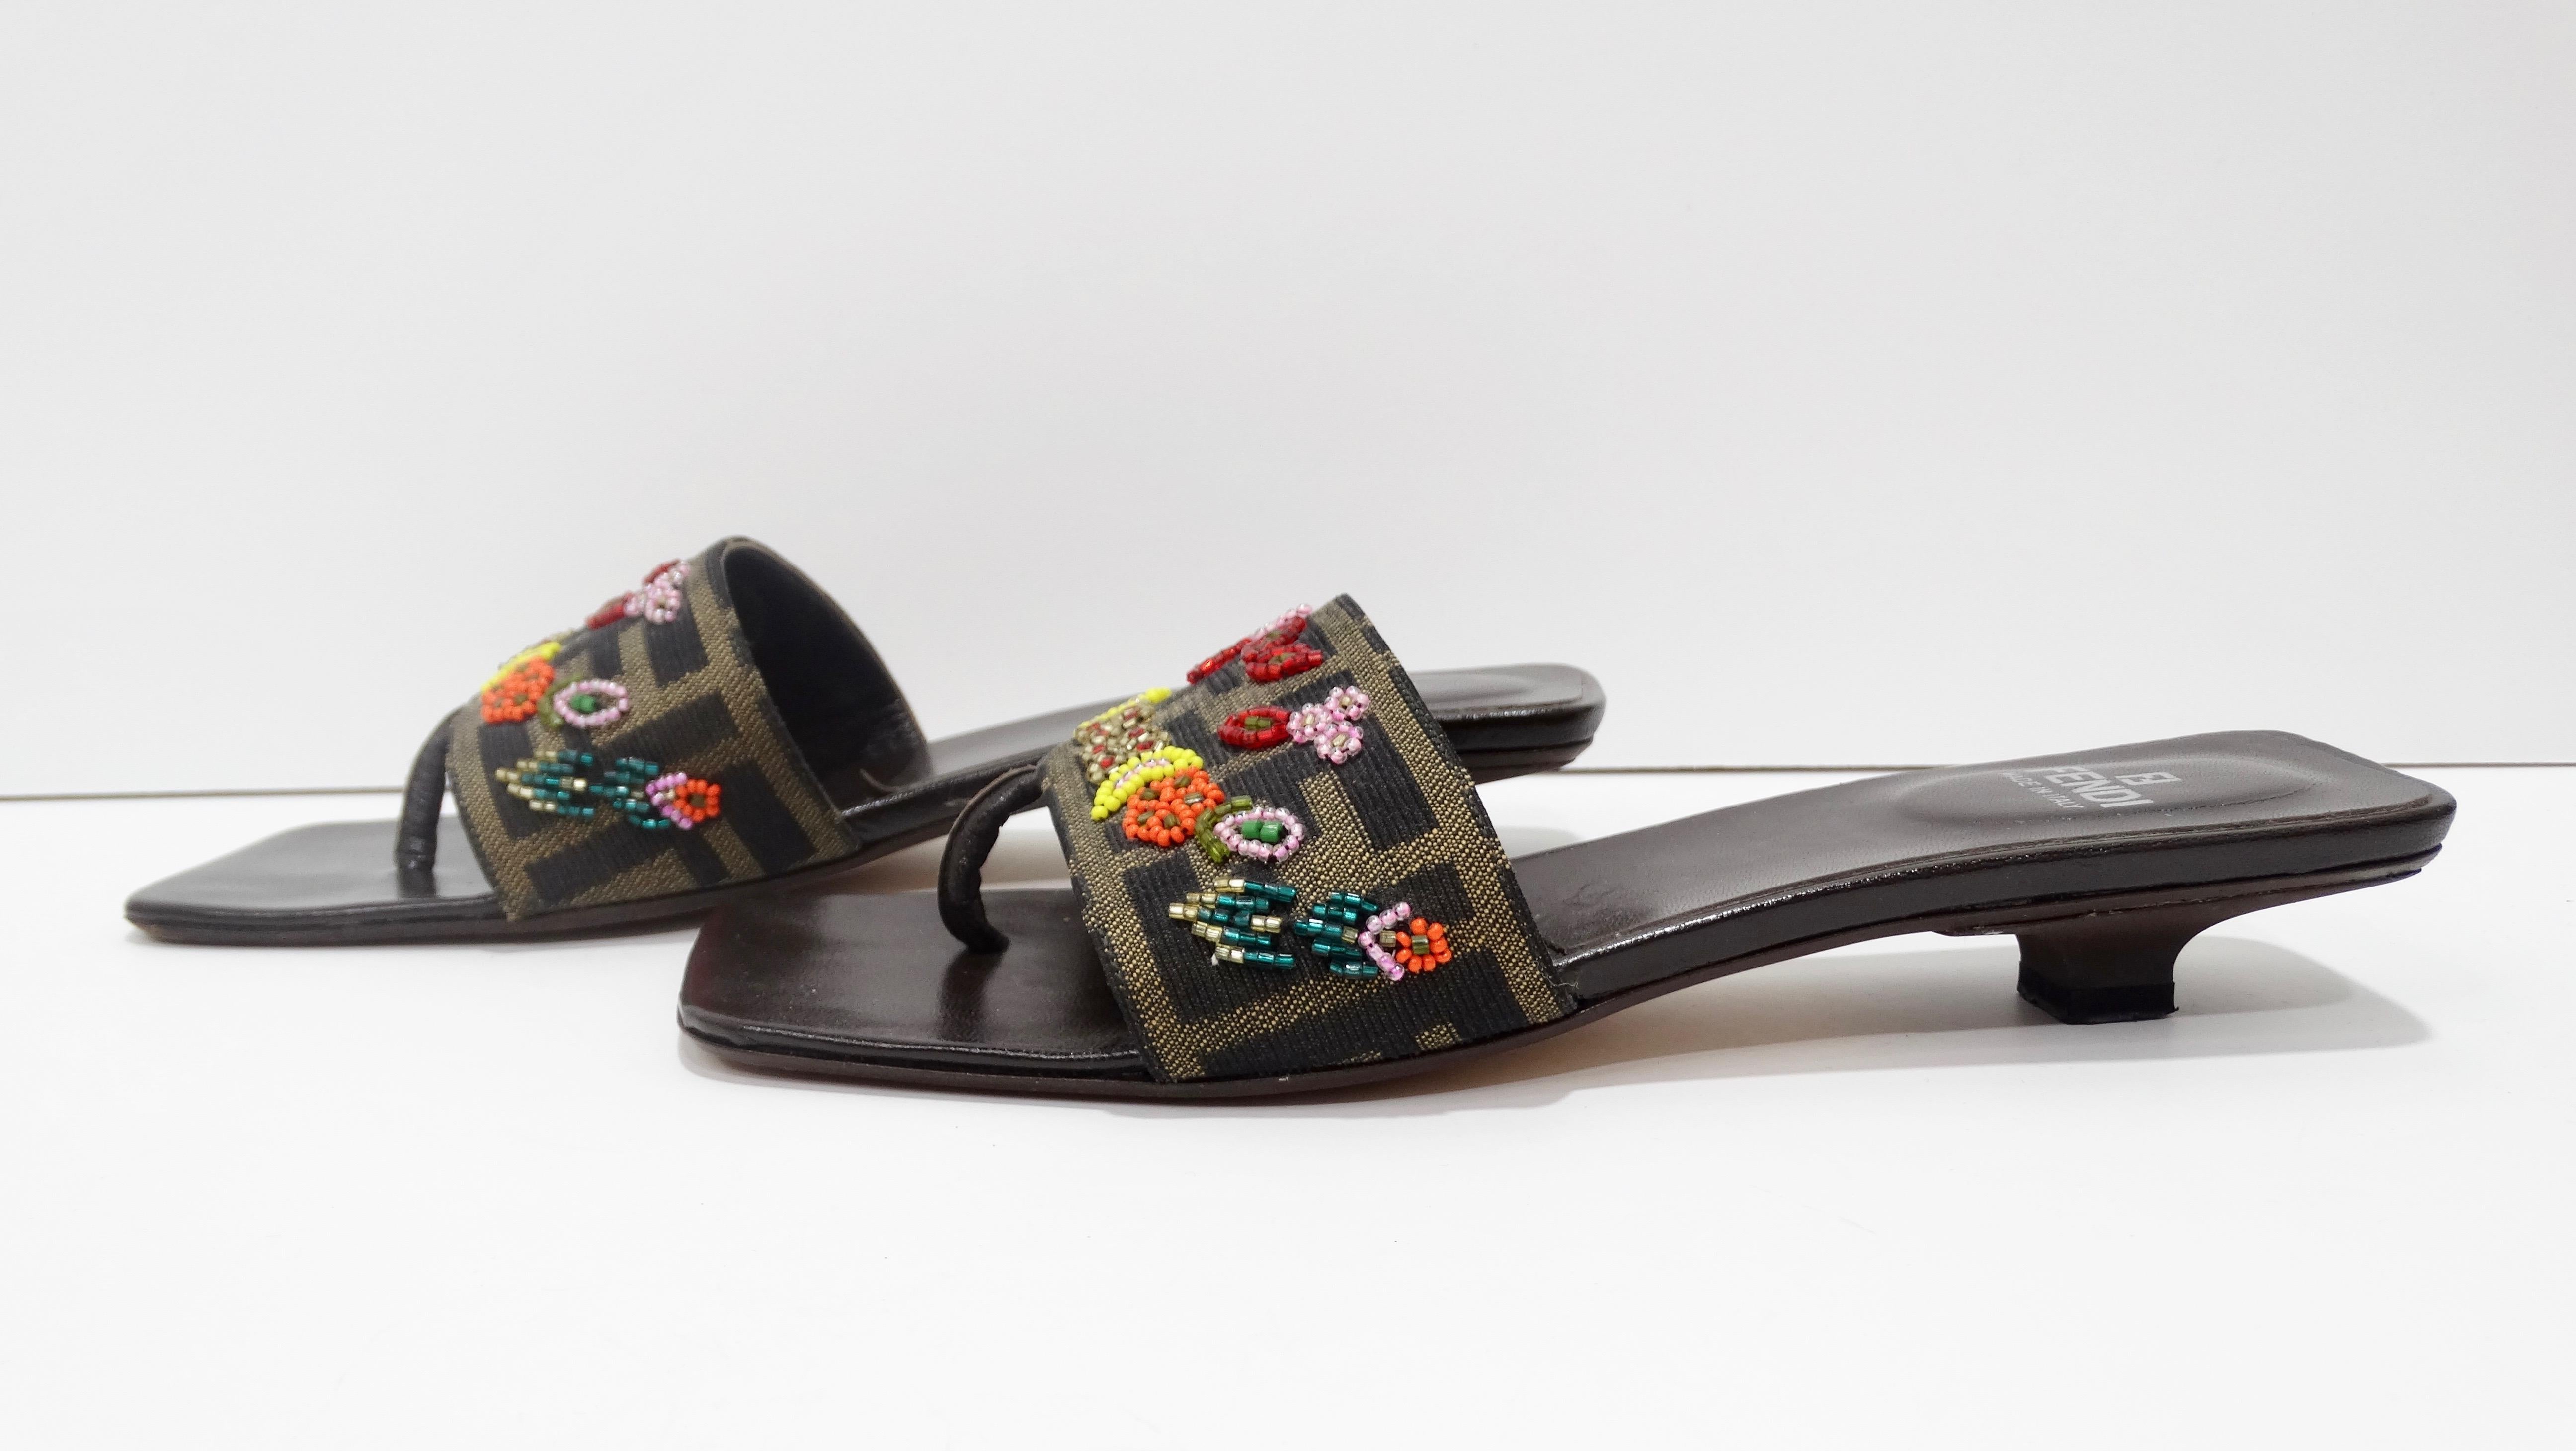 Your perfect Zucca shoe is here! Circa 1990s, these Fendi sandals feature a kitten heel, a leather insole and the iconic Zucca print with floral beading on top. Soles are stamped Made in Italy and are marked a size 7. The ultimate summer shoe, these